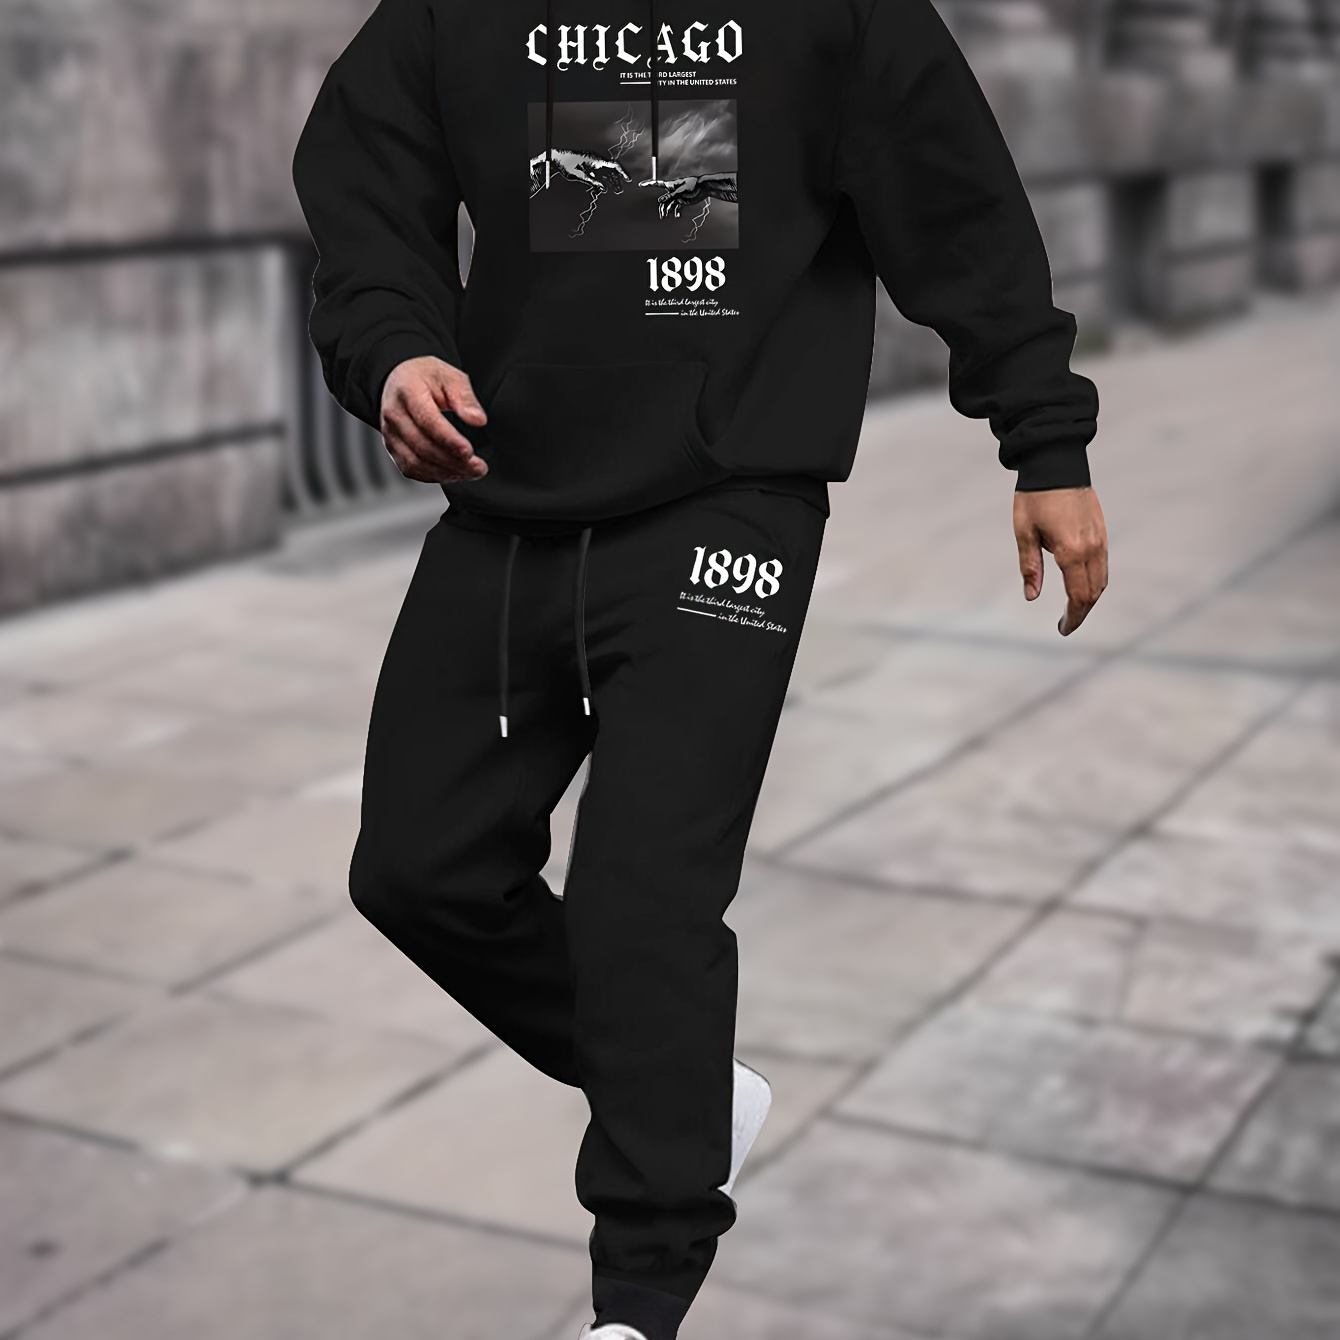 

Chicago 1898 And Fists Graphic Print, Men's 2pcs Outfits, Casual Crew Neck Long Sleeve Pullover Hoodie And Drawstring Sweatpants Joggers Set For Spring And Fall, Men's Clothing